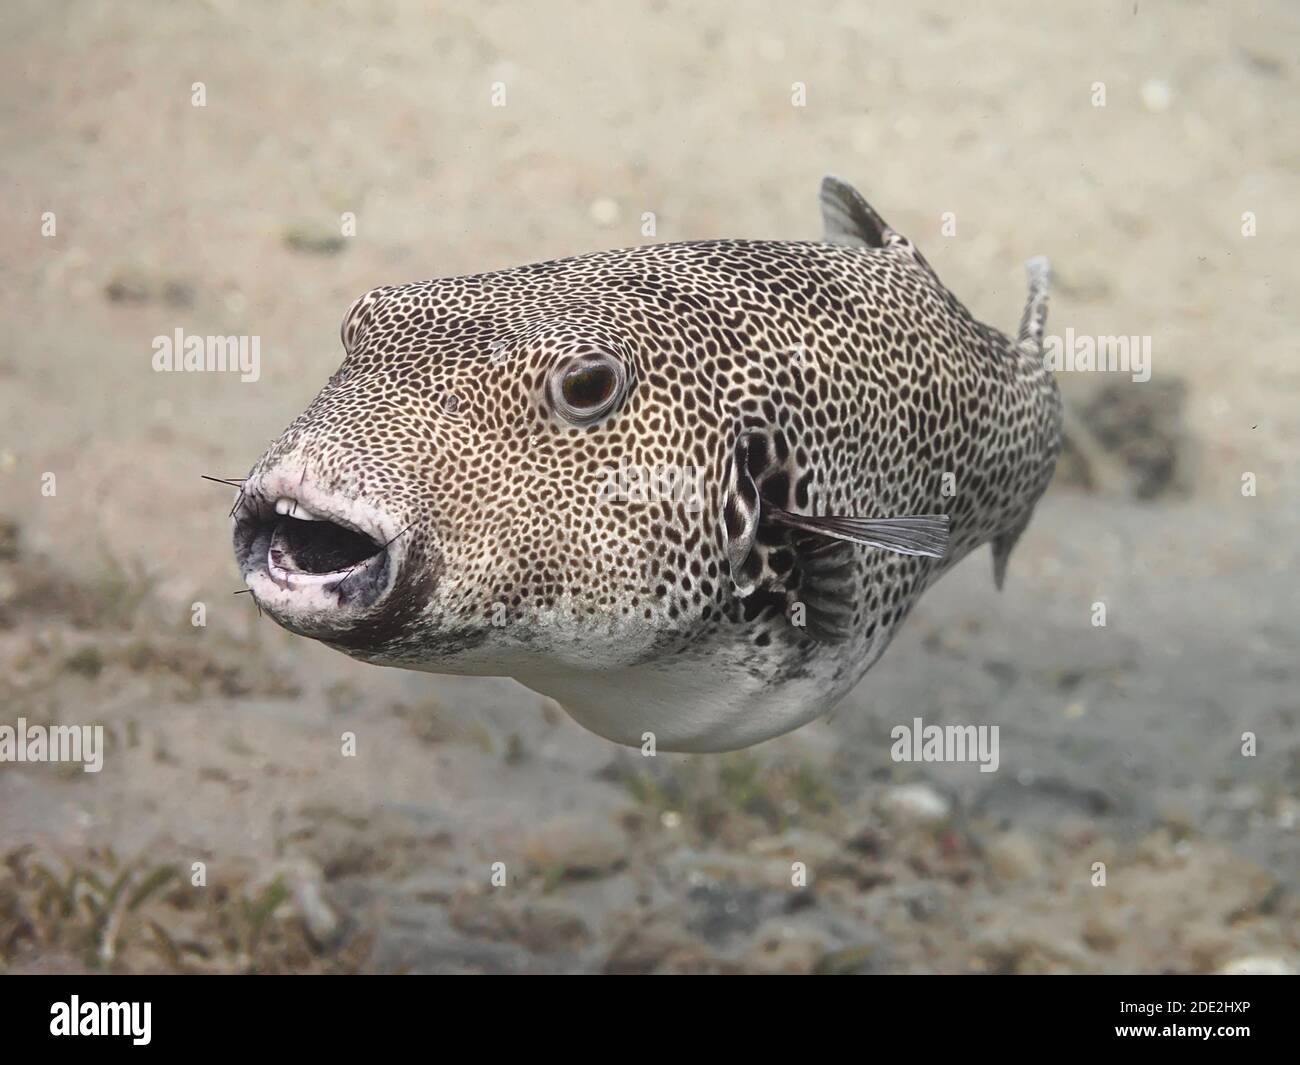 Stellate puffer fish (Arothron stellatus), also known as the starry puffer,  or starry toadfish, eating sea urchin Stock Photo - Alamy